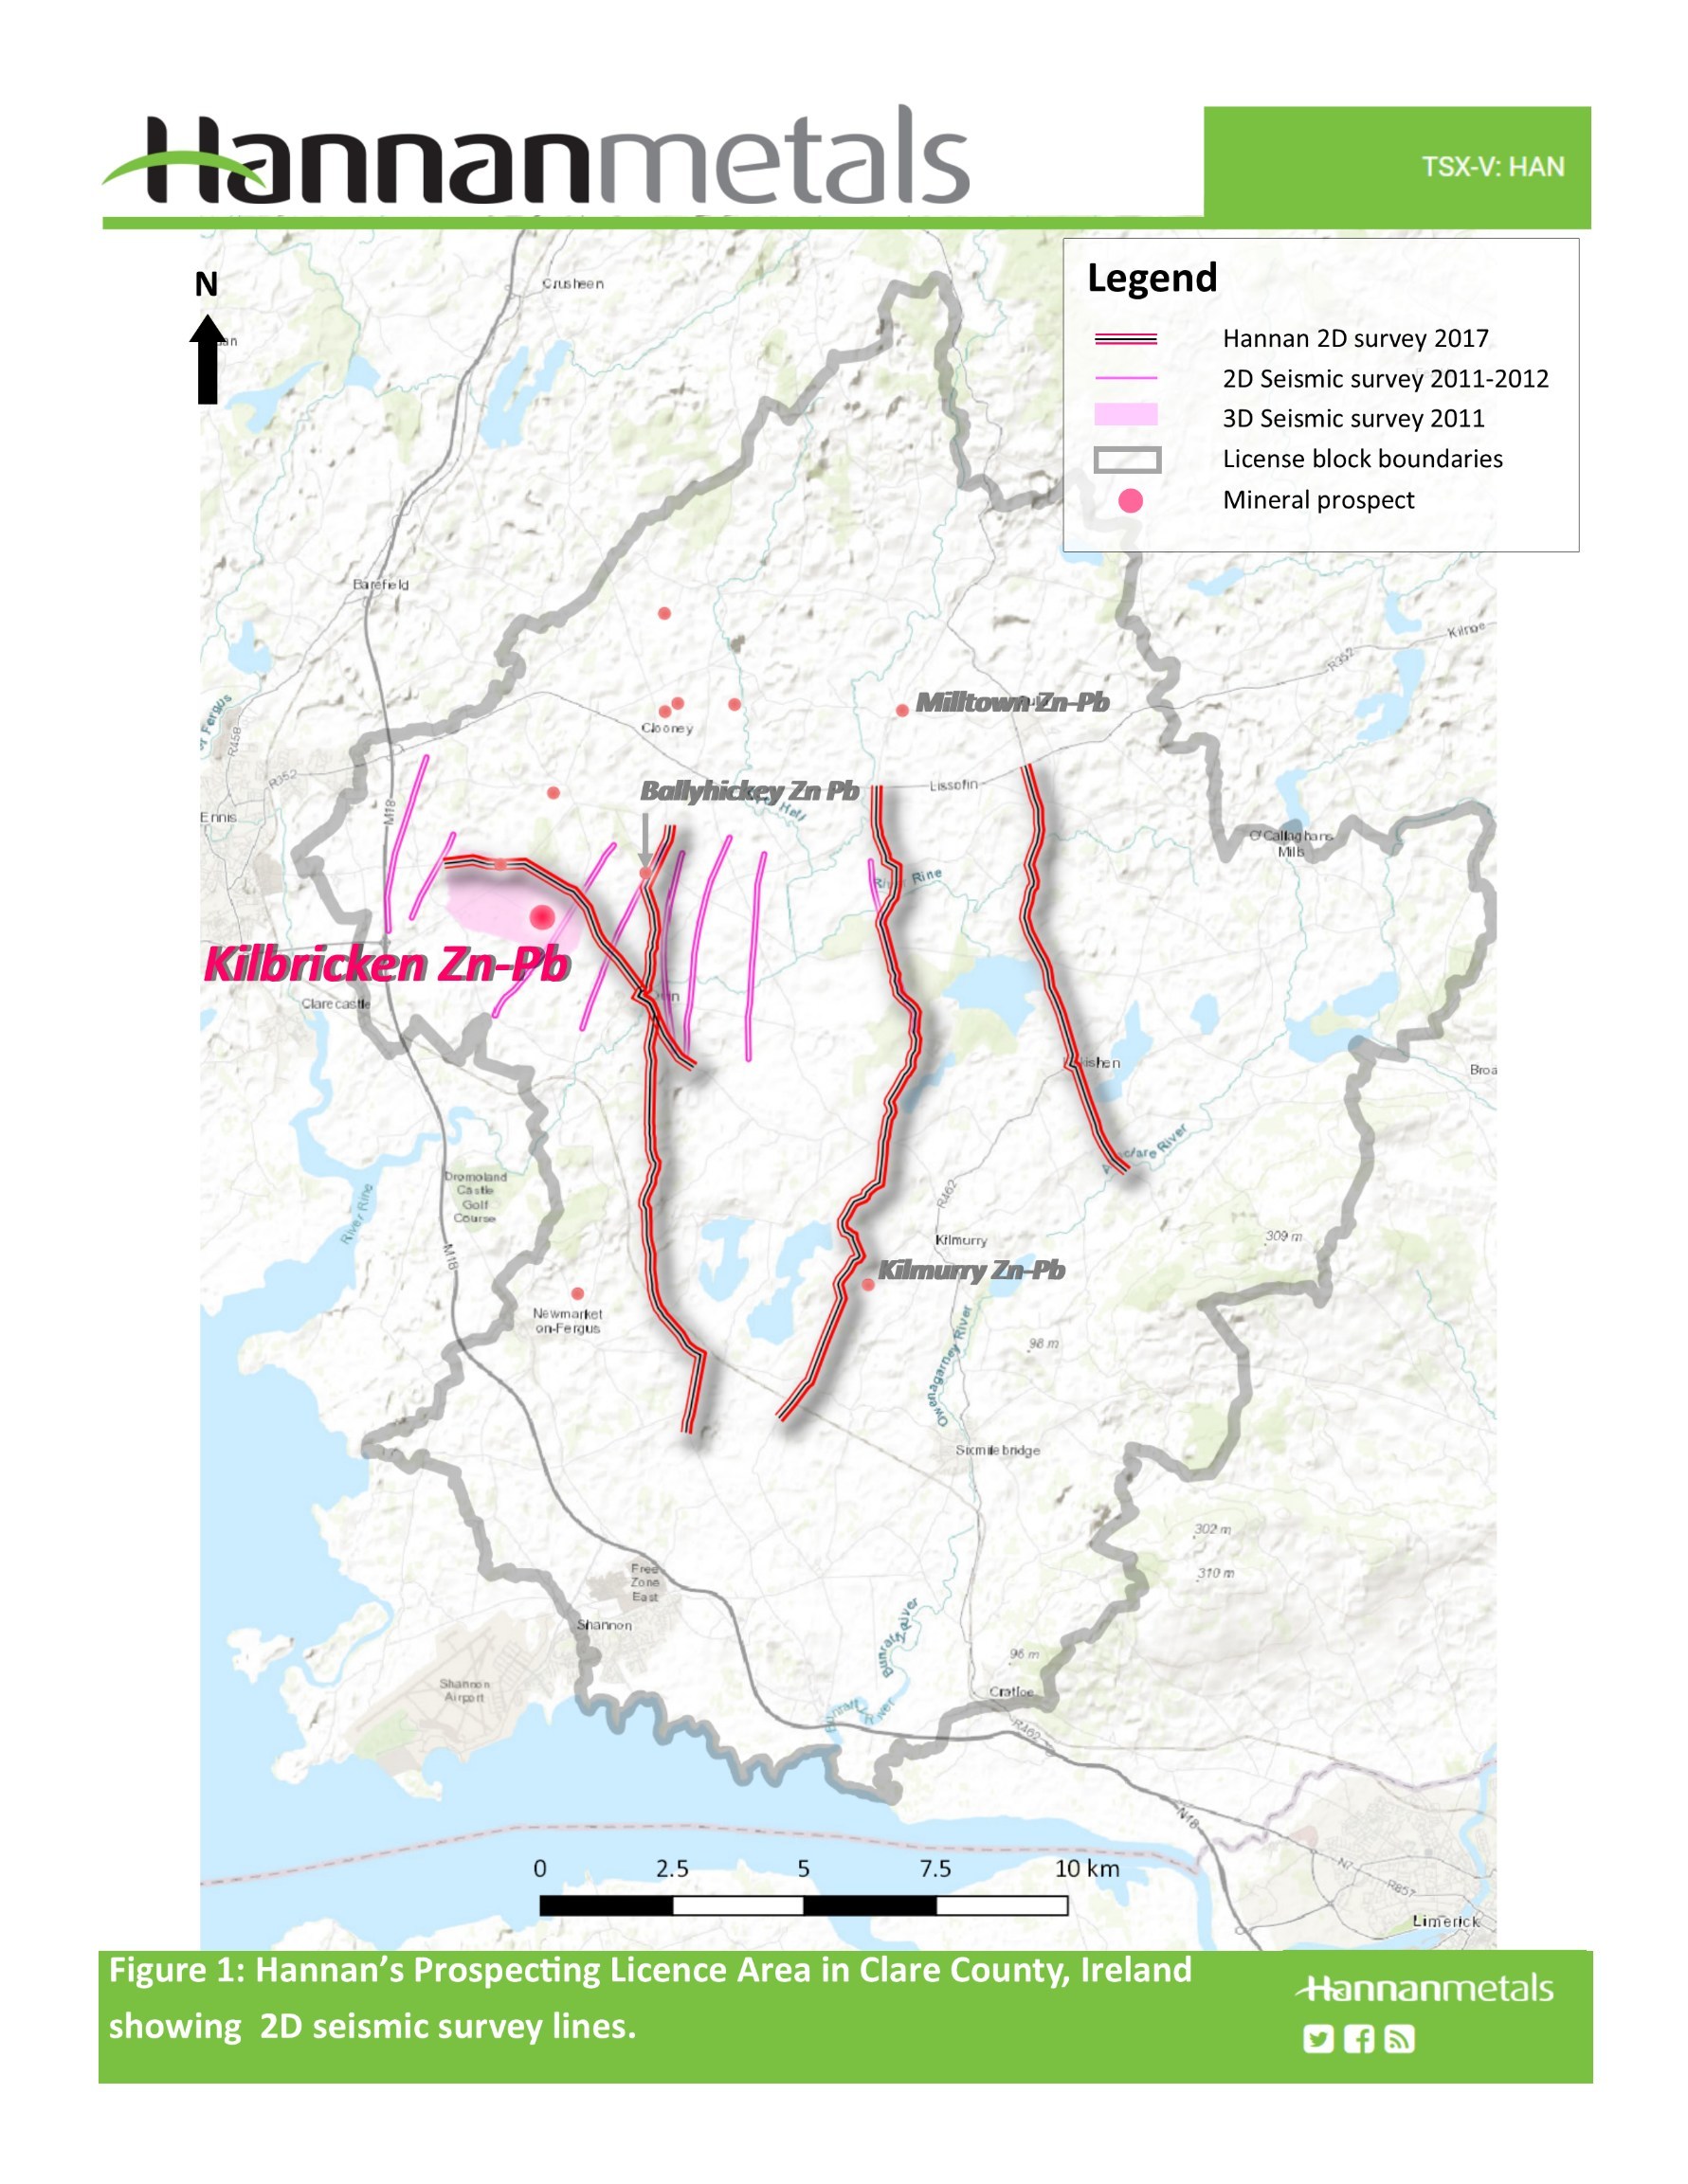 Figure 1: Hannan's Prospecting Licence Area in Clare County, Ireland showing 2D seismic survey lines. (CNW Group/Hannan Metals Ltd.)